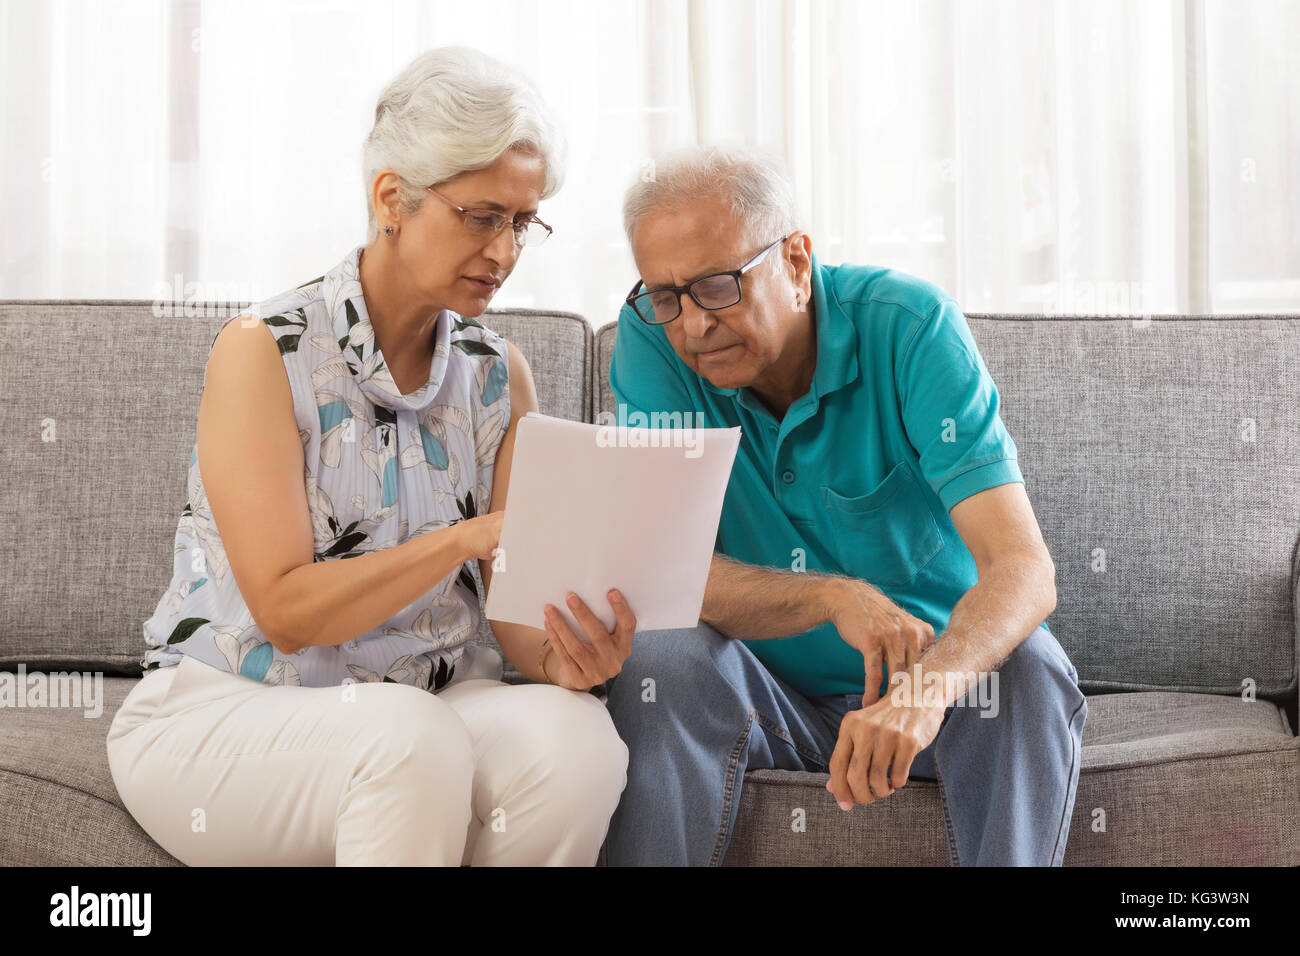 A Senior couple sitting on sofa document Banque D'Images